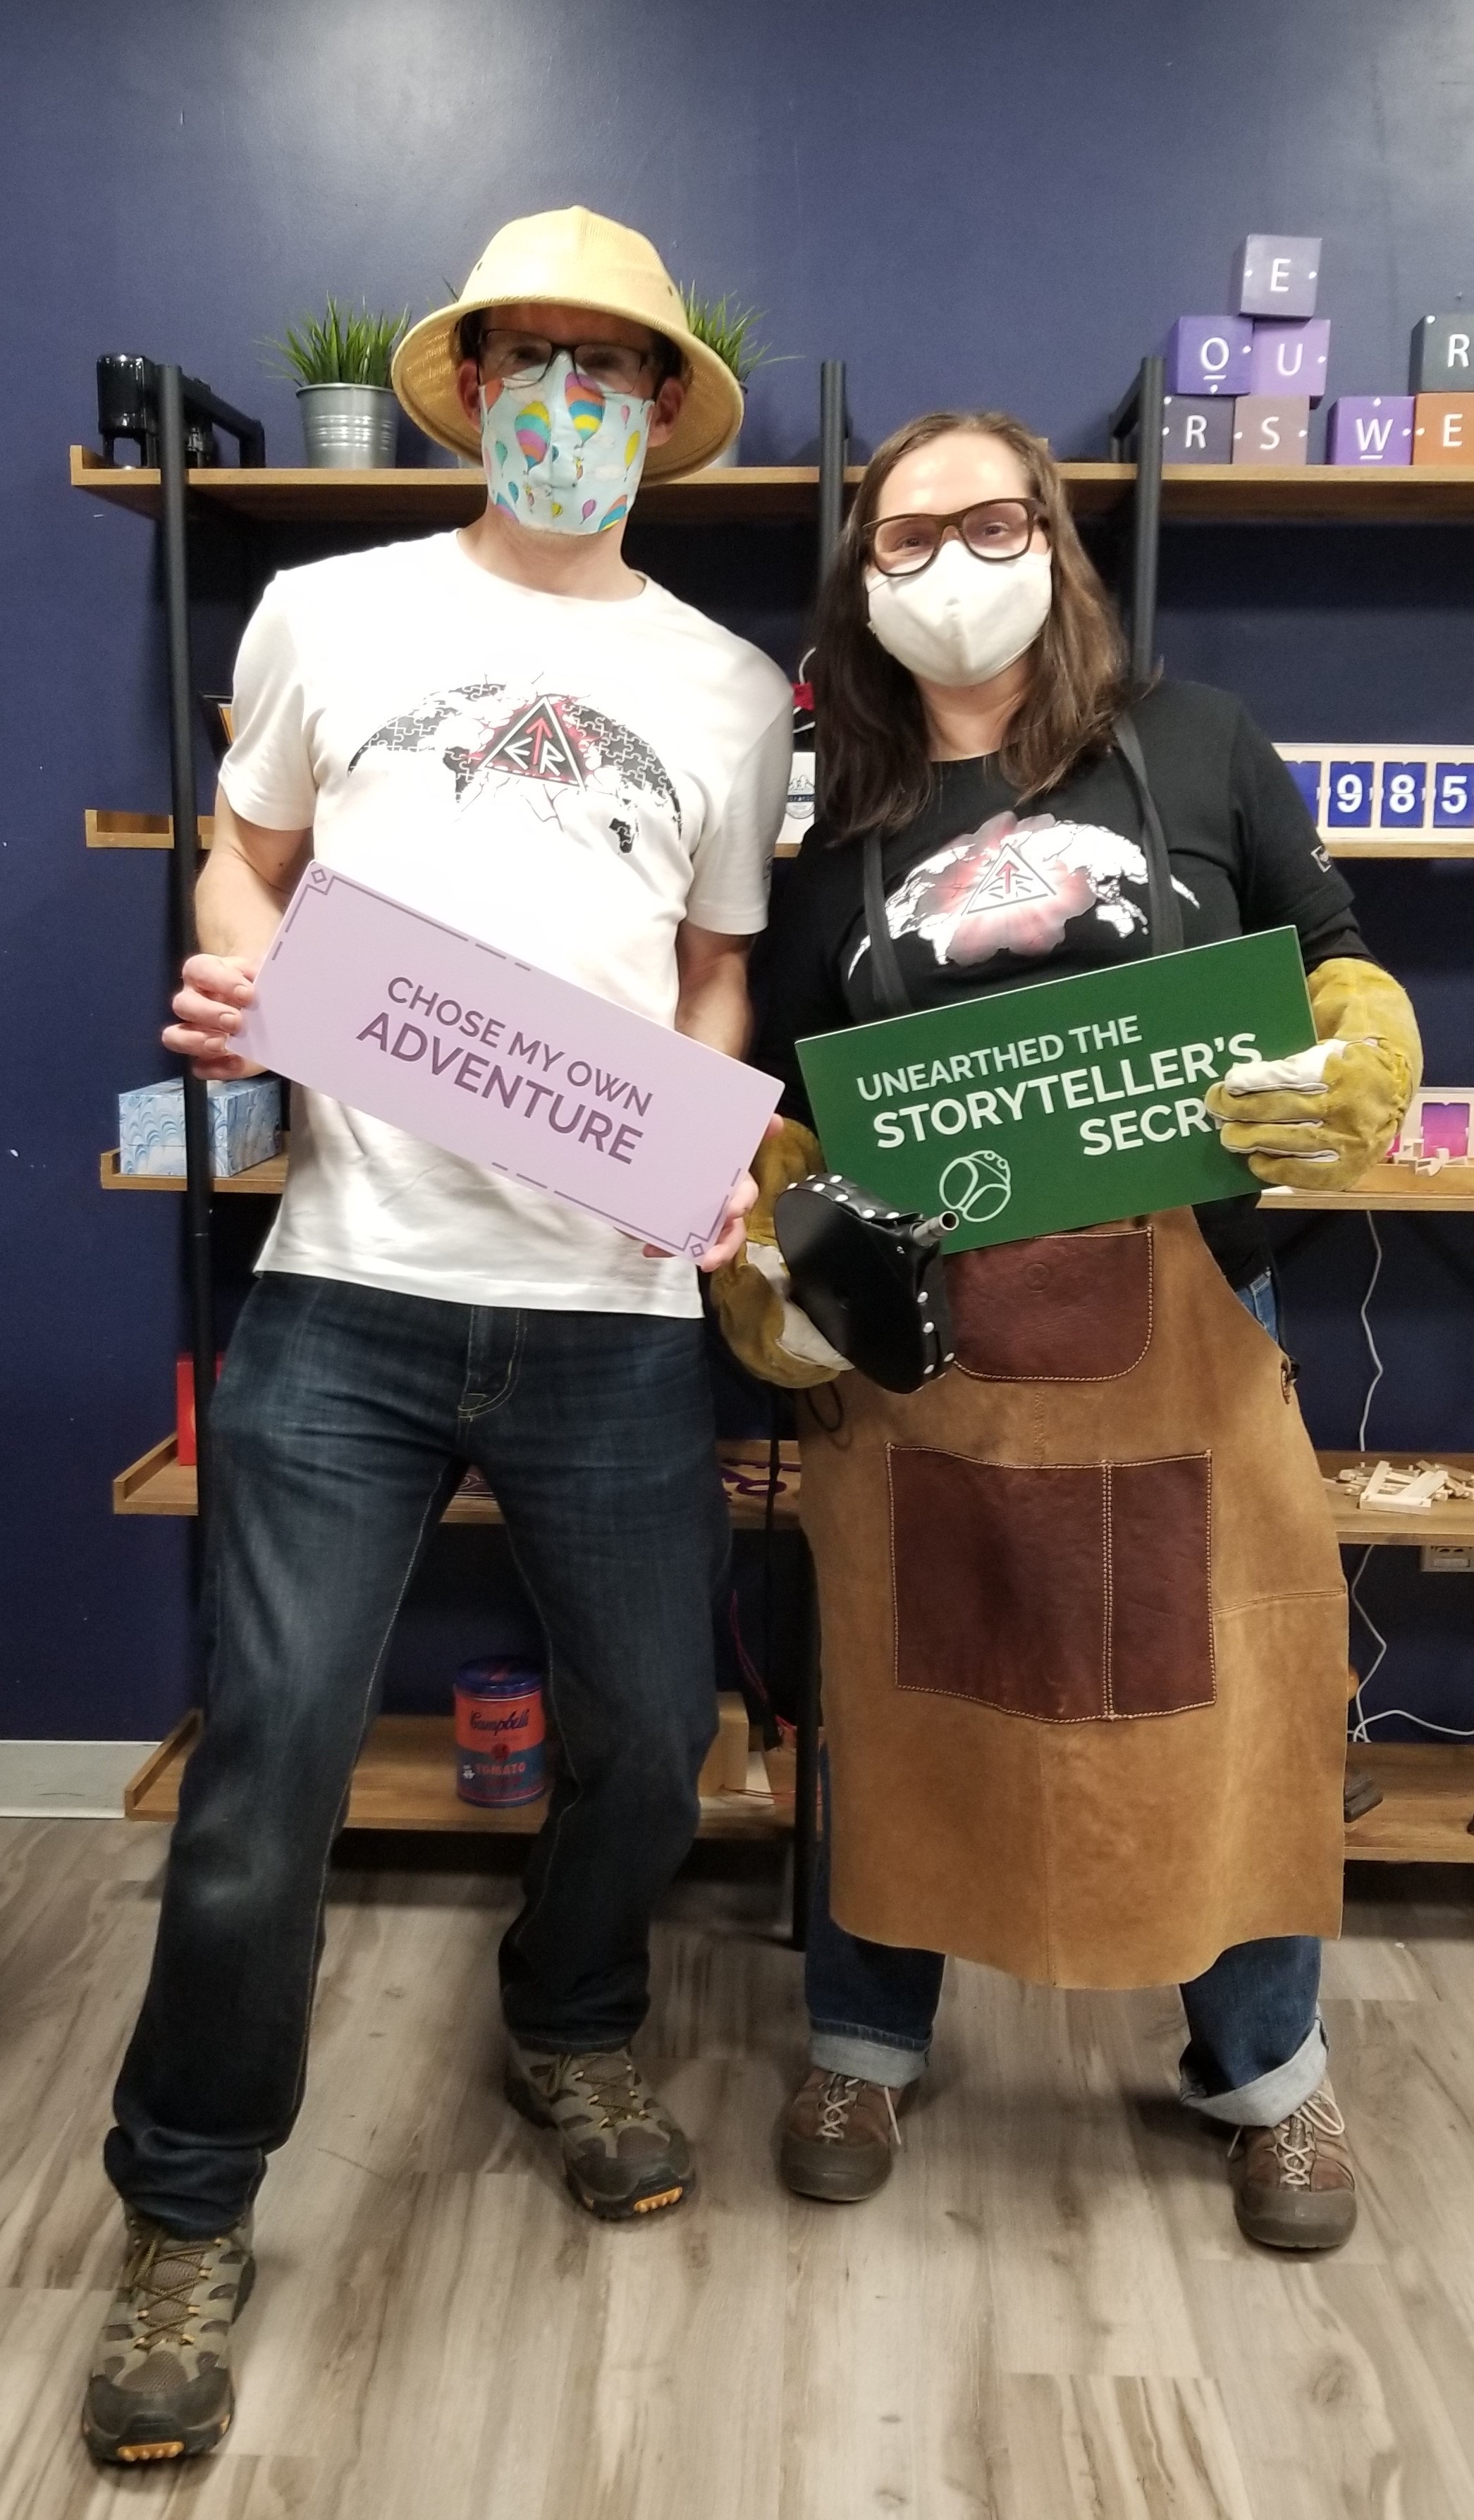 Krista and Dave's victory photo from Storyteller's Secret, an incredible escape room at Boxaroo in Boston.